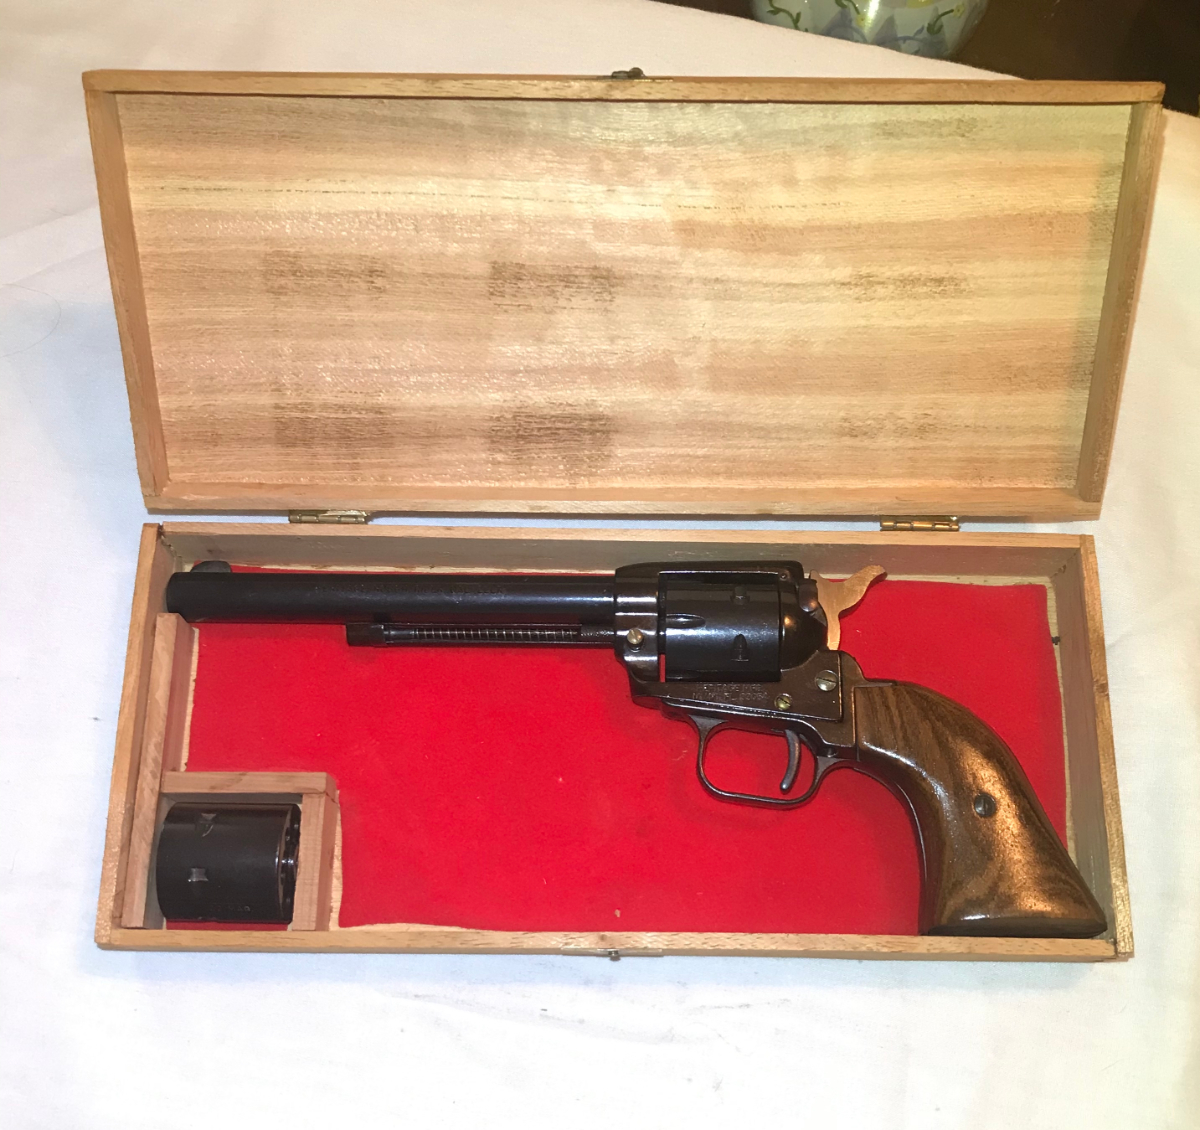 heritage-arms-rough-rider-revolver-22-lr-caliber-and-22wmr-cylinder-6-5